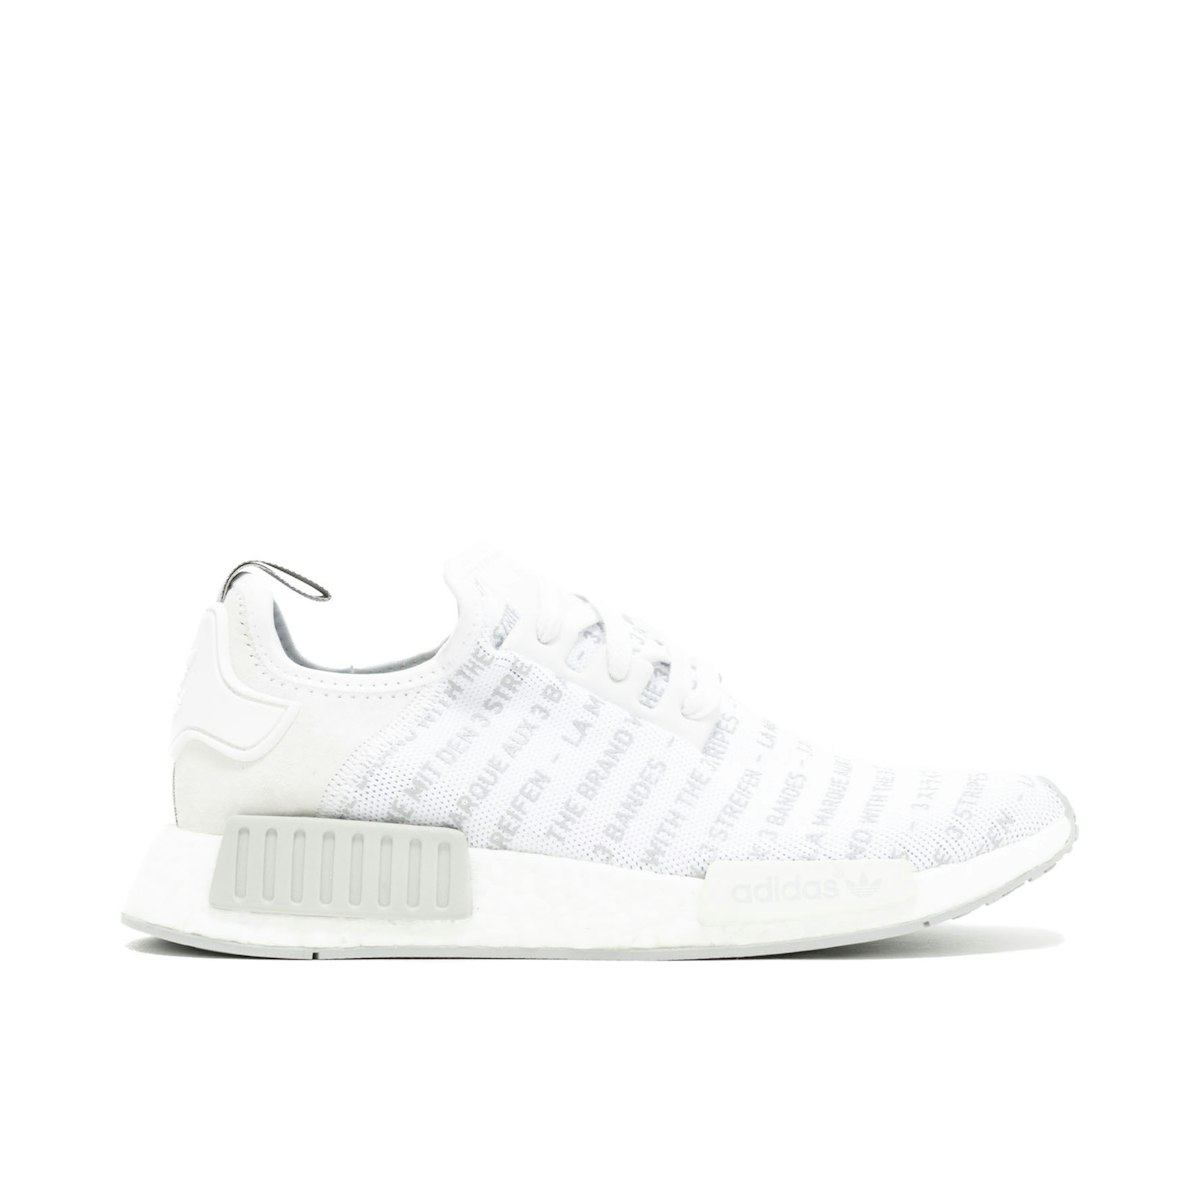 Whiteout Brand with 3 Stripes' NMD R1 | S76518 | Laced